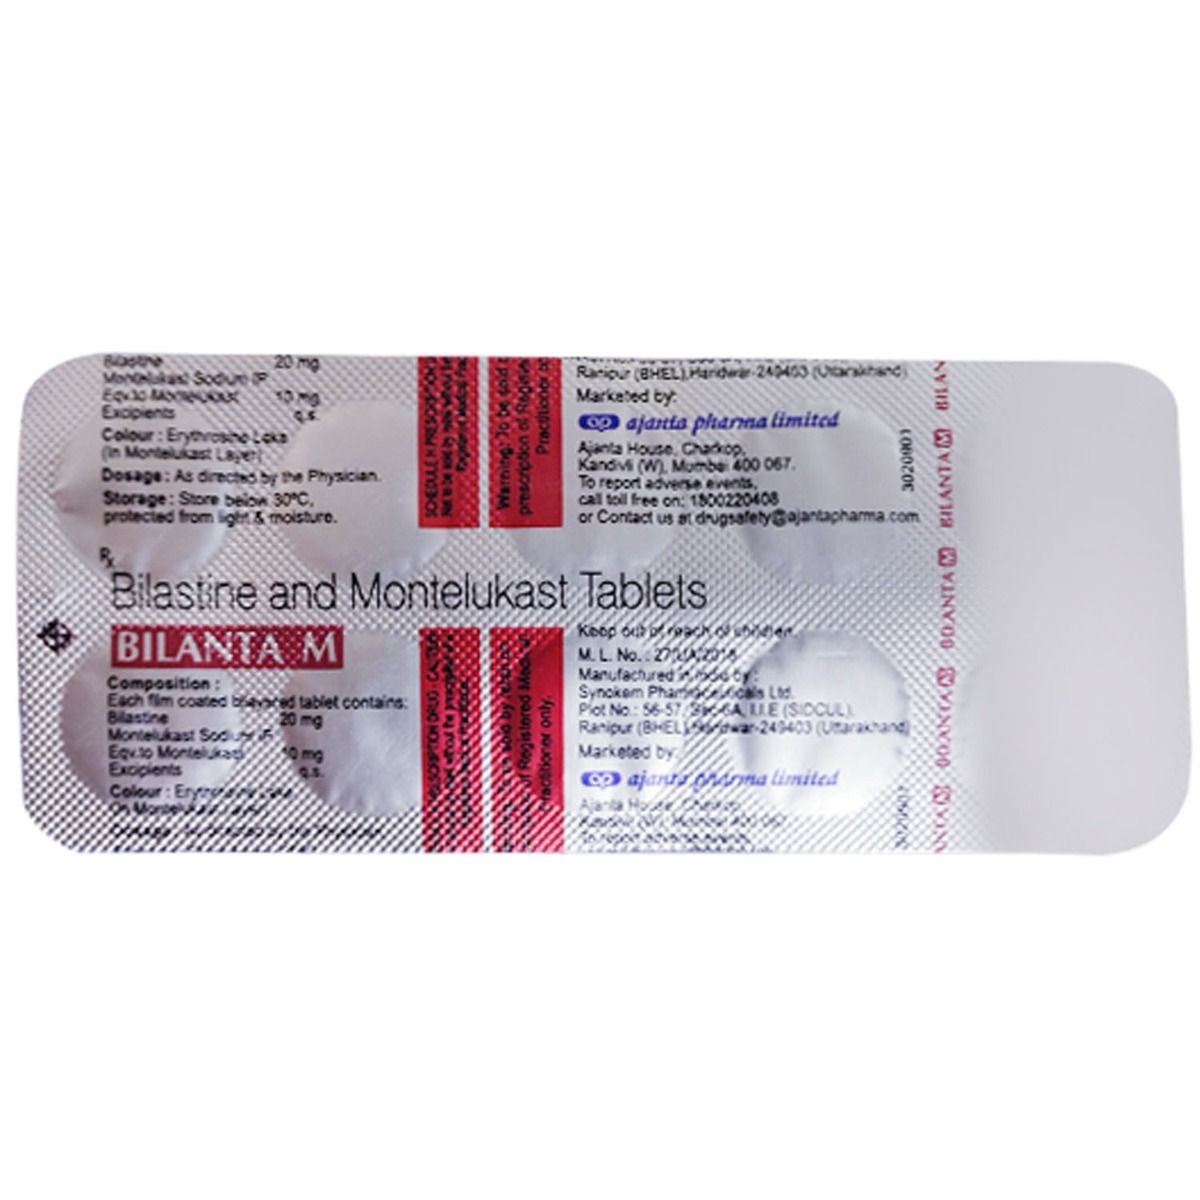 Bilanta M Tablet 10's Price, Uses, Side Effects, Composition ...